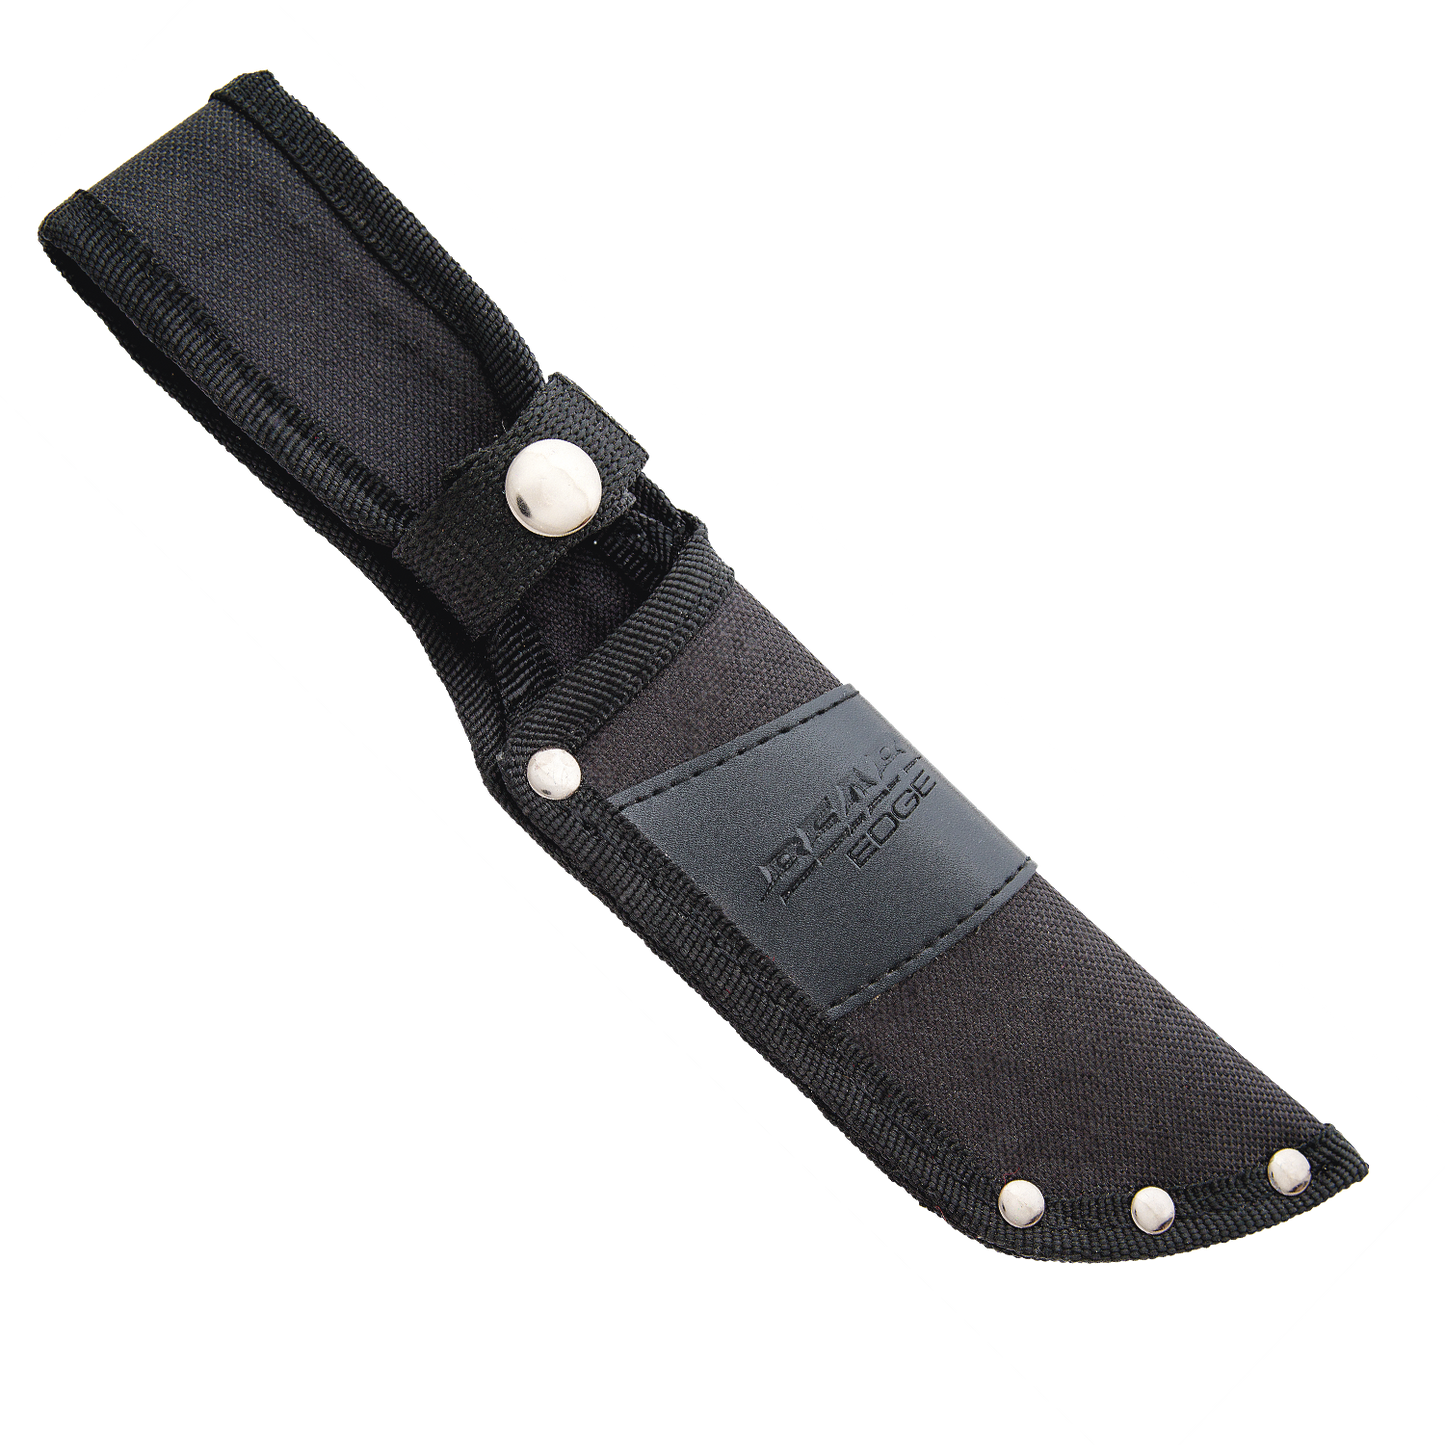 Bear and Son 9-1/4 in. G10 Handle Compact Bowie Knife W/Ballistic Sheath #61108